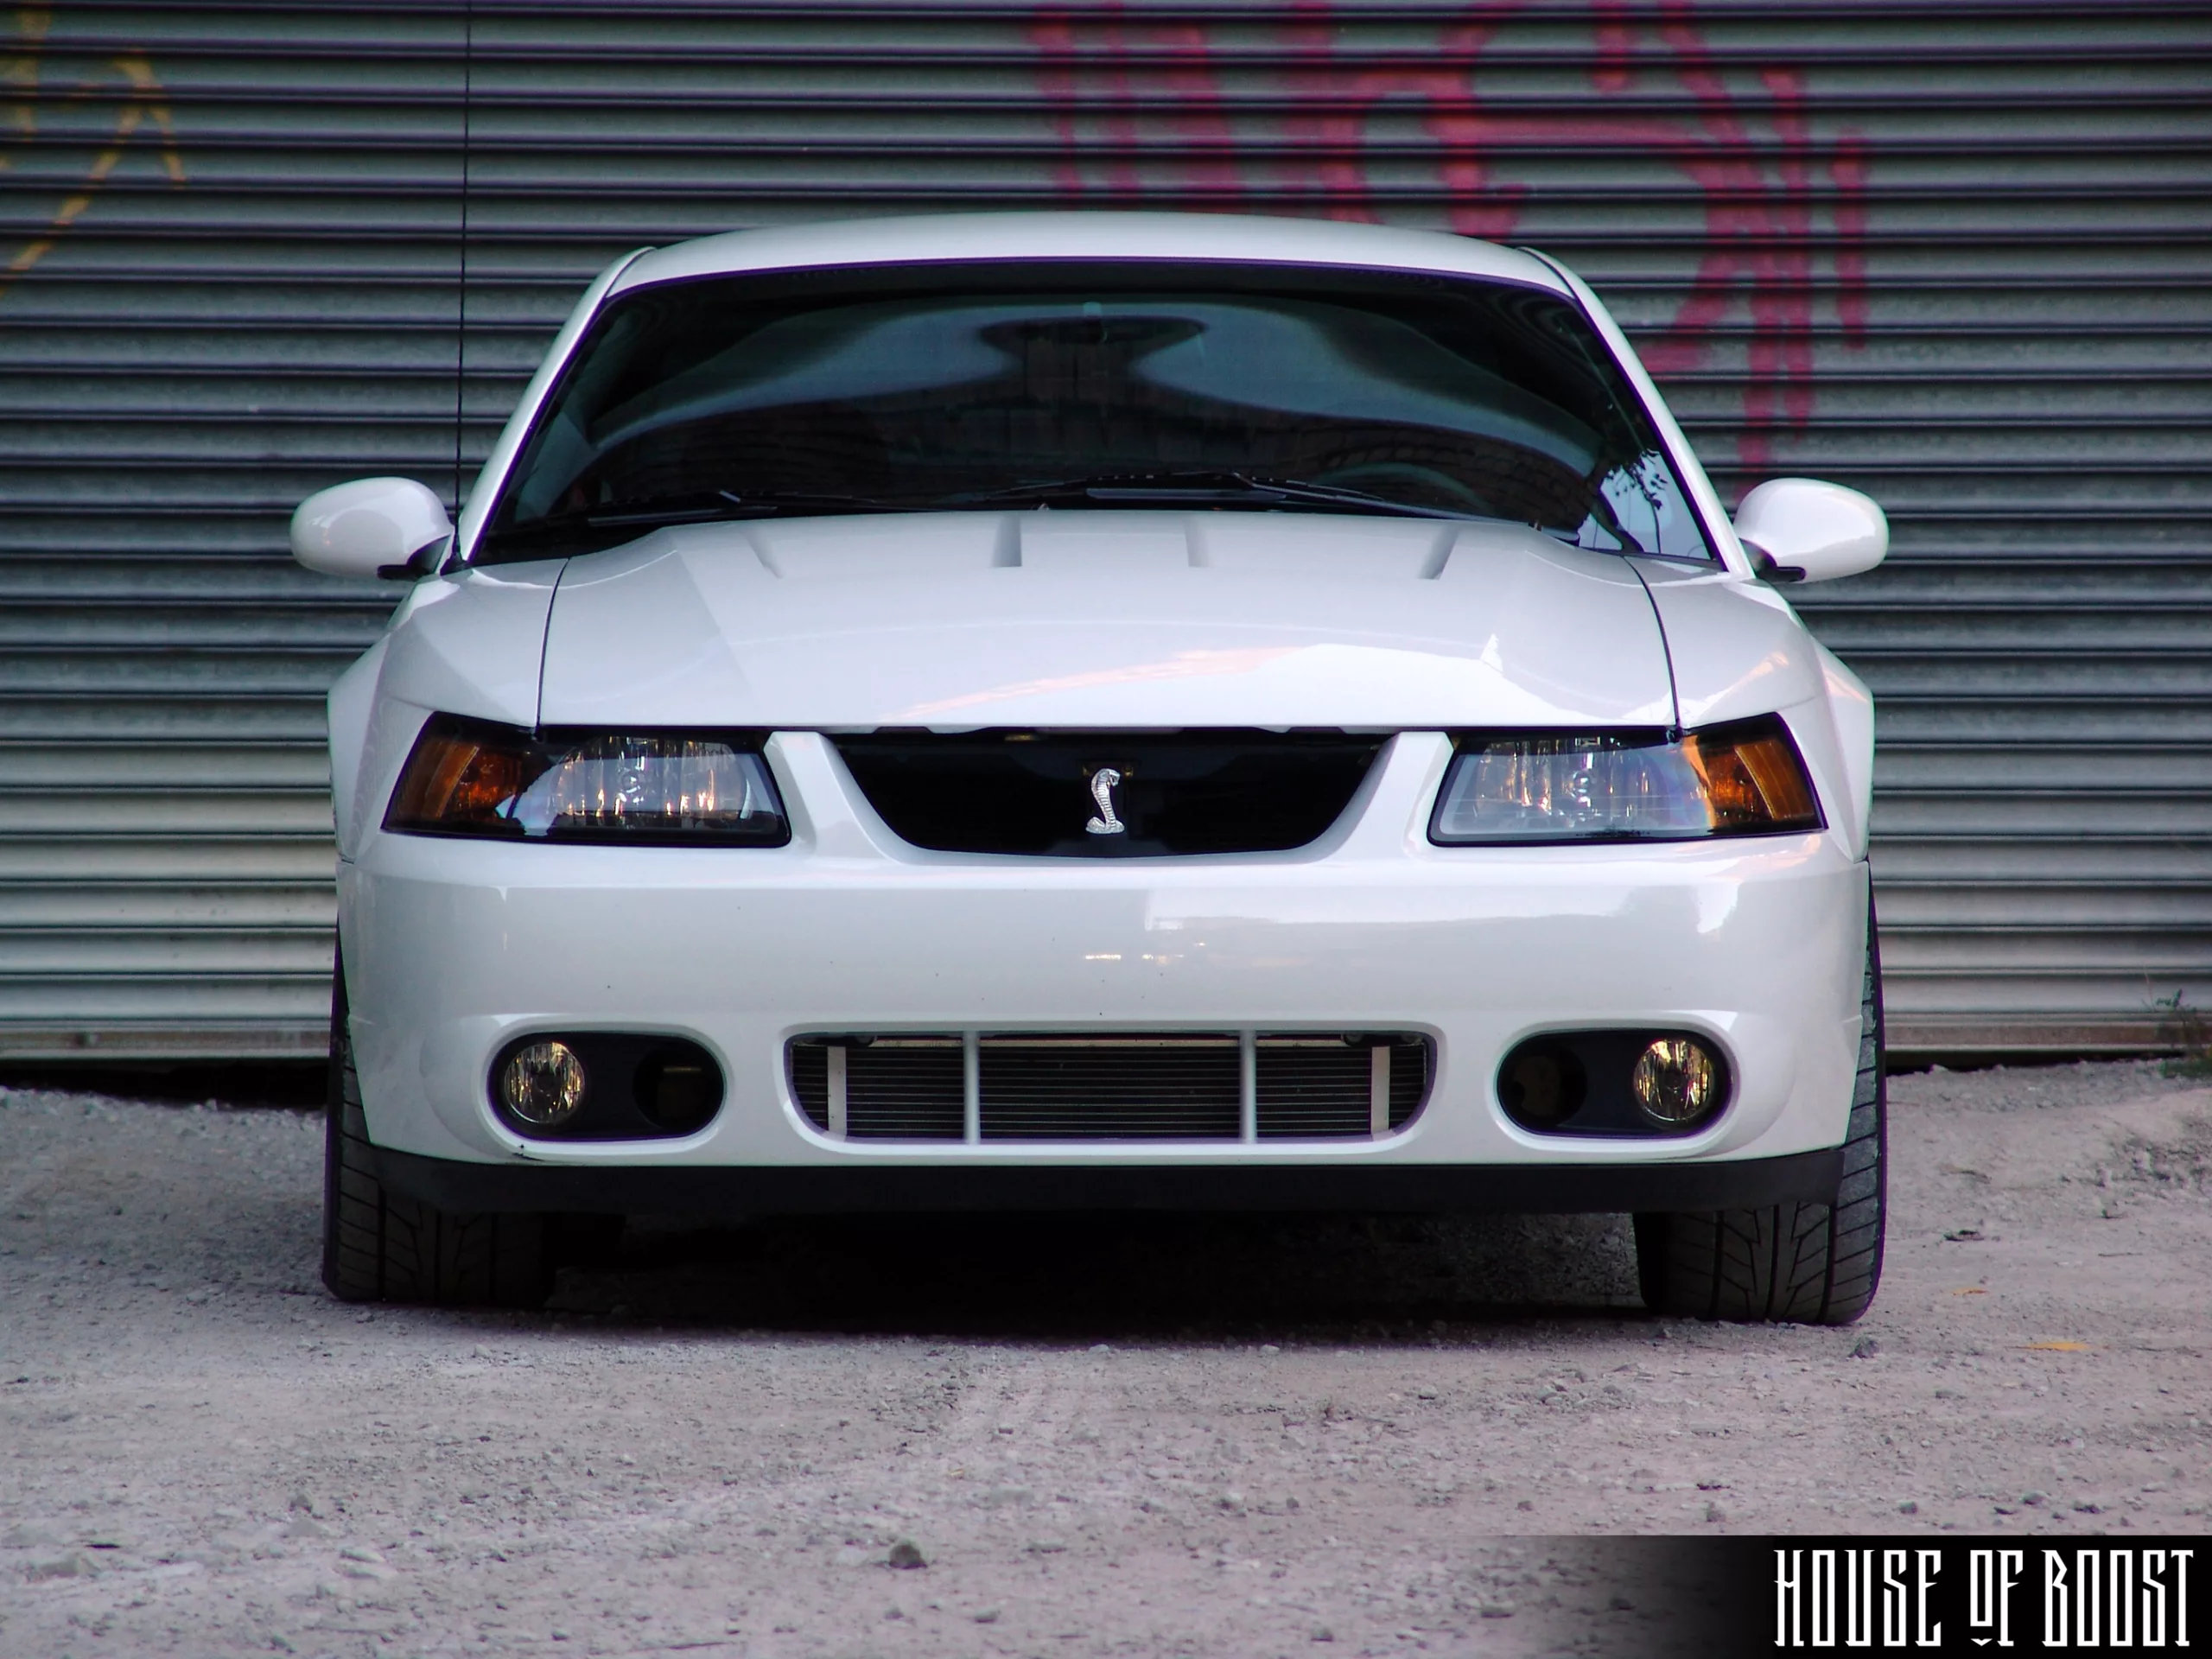 House of Boost built ProCharged Ford Mustang Cobra in white front end